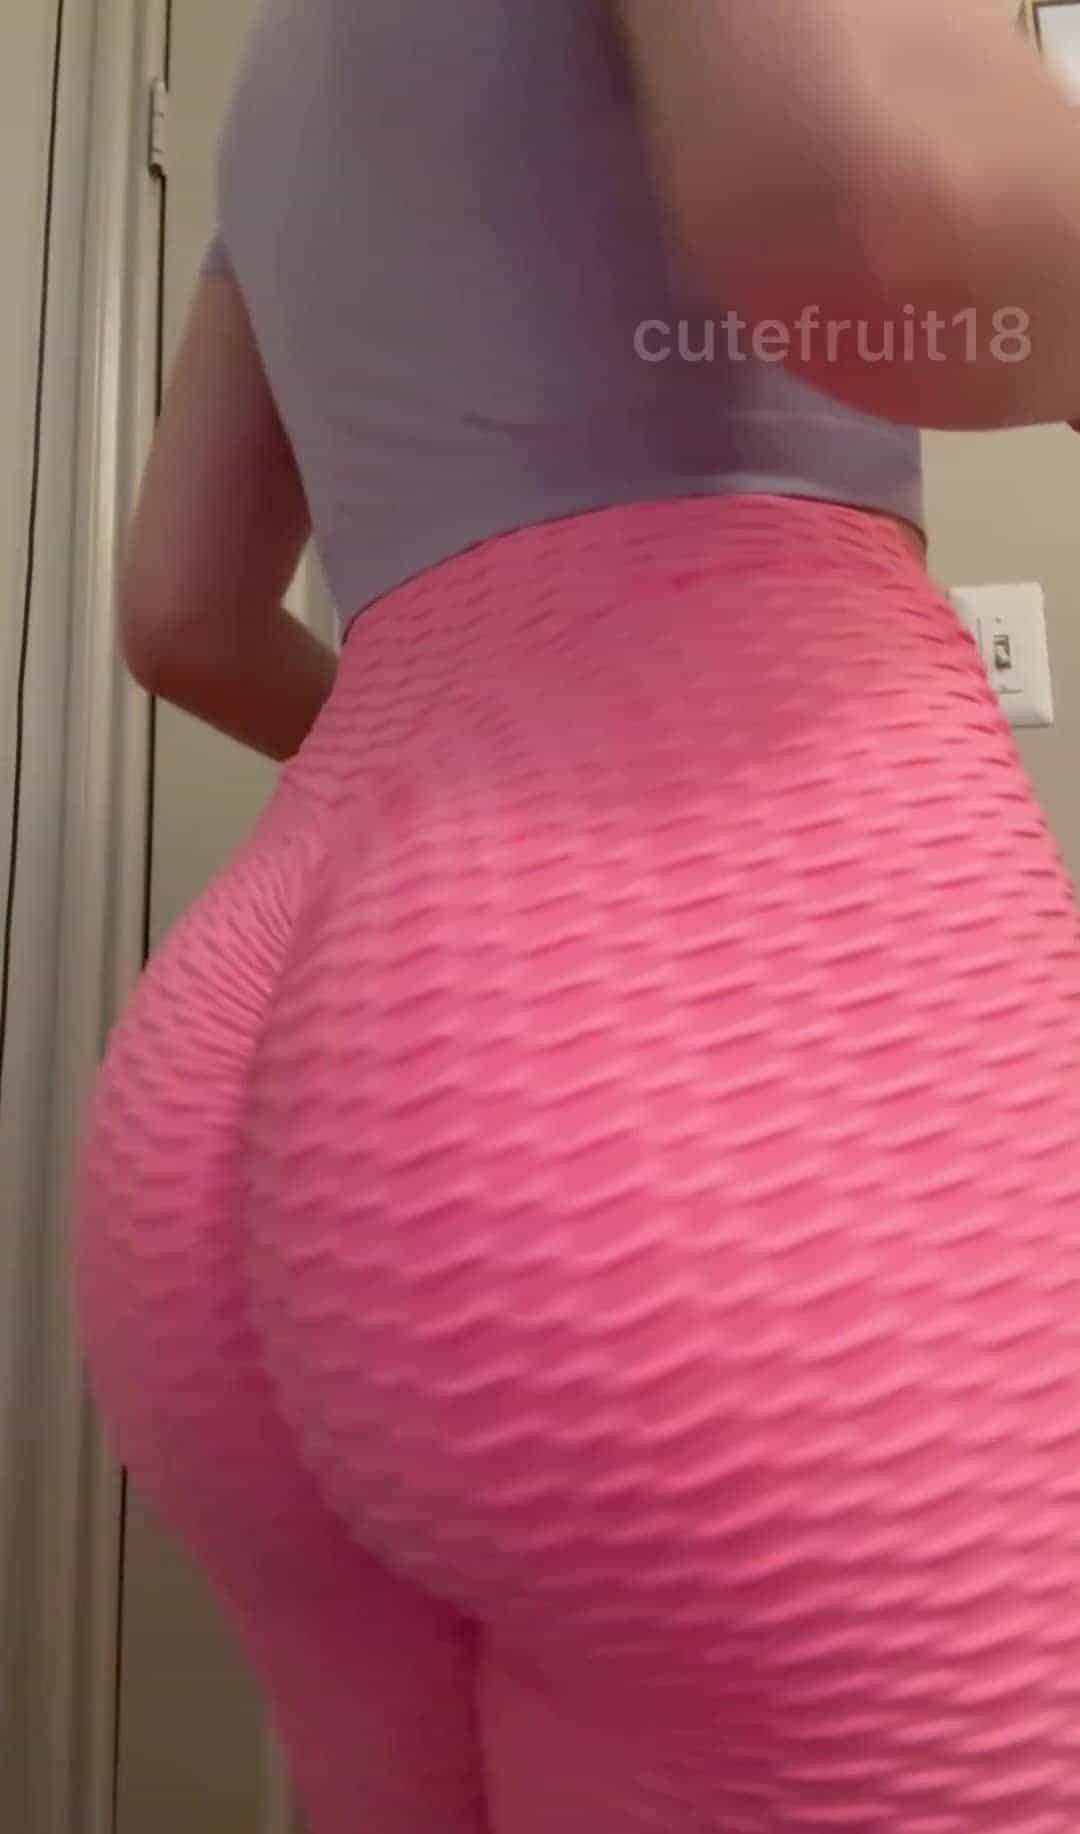 brightly colored yoga pants really make my ass pop